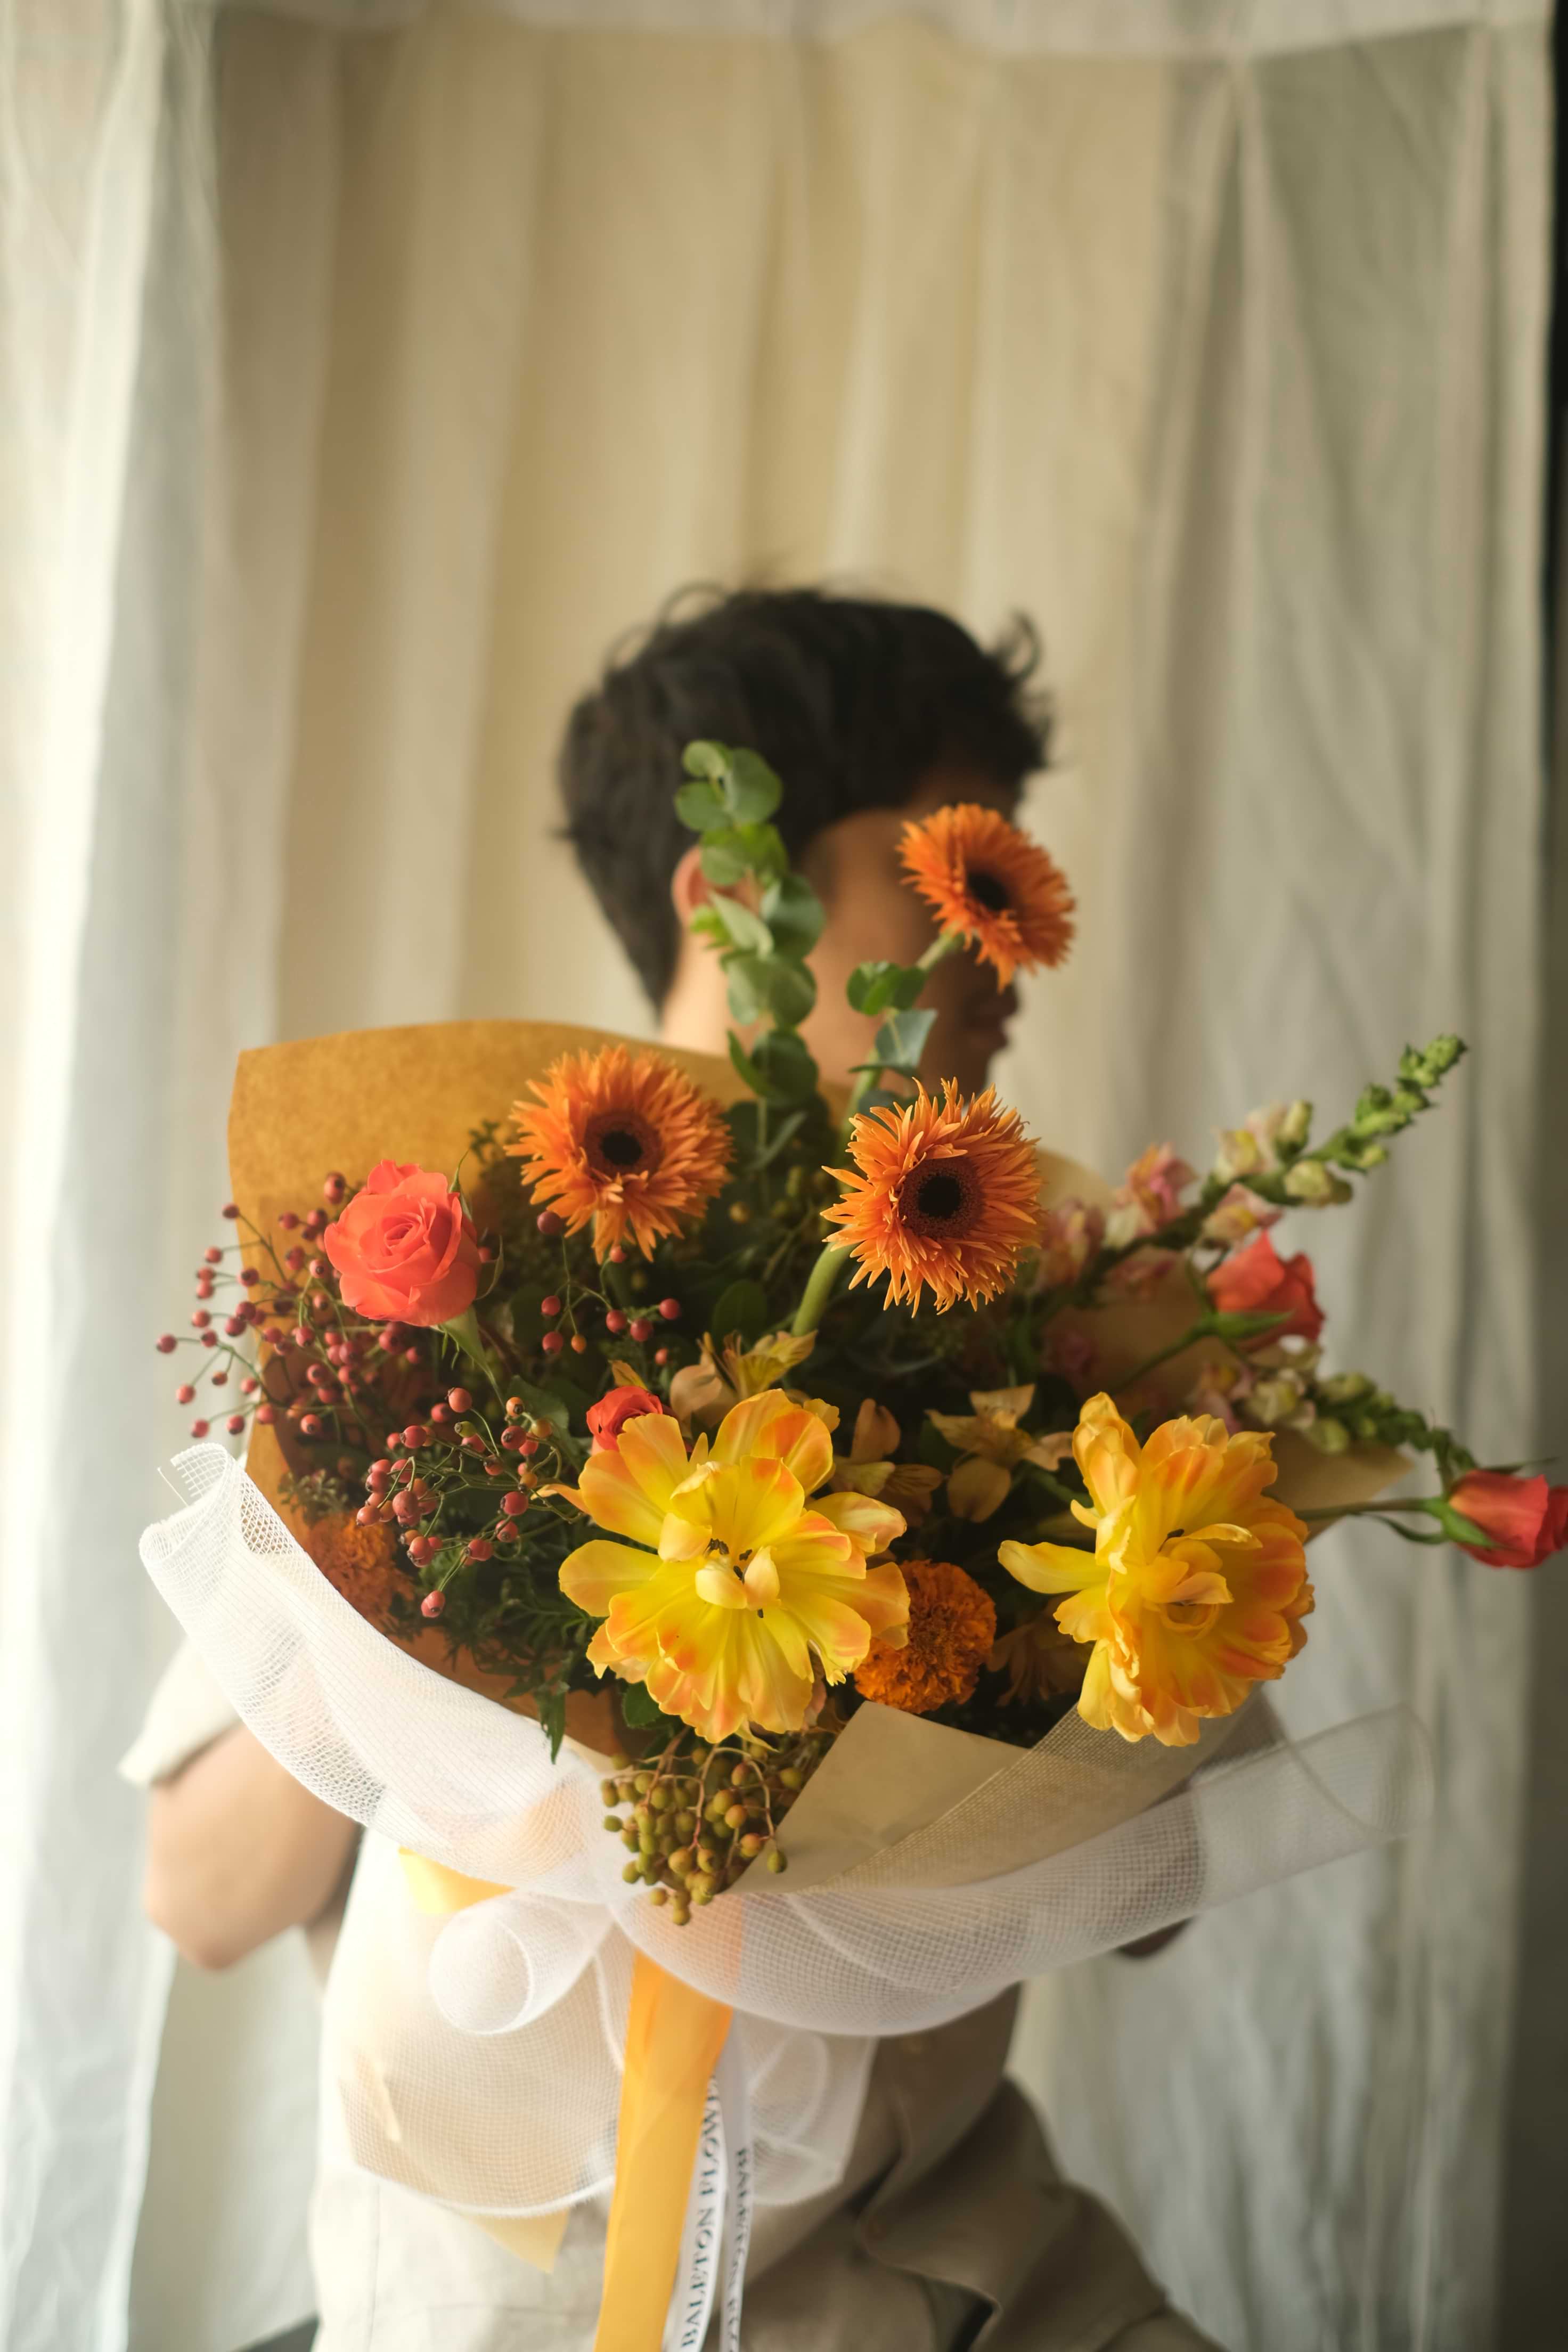 Rp850.000.  A radiant bouquet of full orange, capturing the warmth and brightness of cherished moments with mom